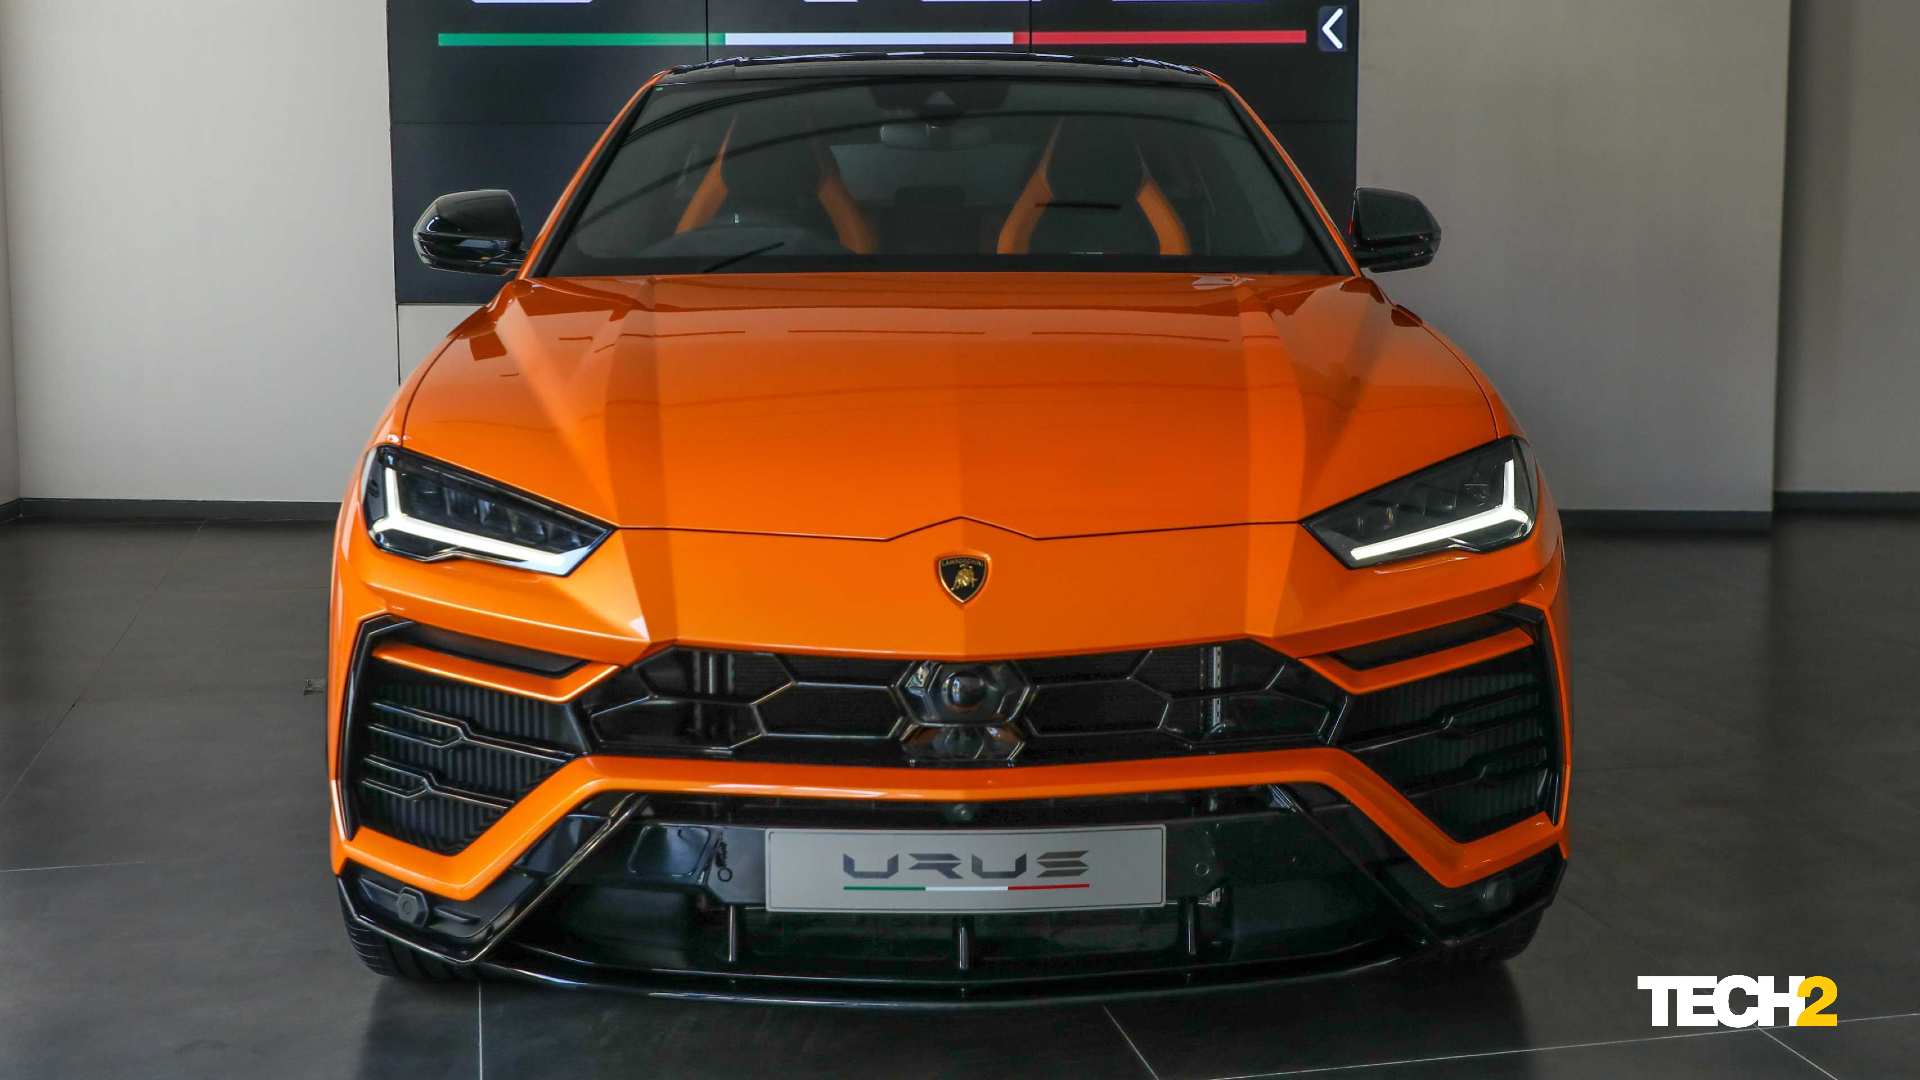 Lamborghini confident of doubling India sales by 2025, demand for Urus super-SUV driving volumes- Technology News, Firstpost